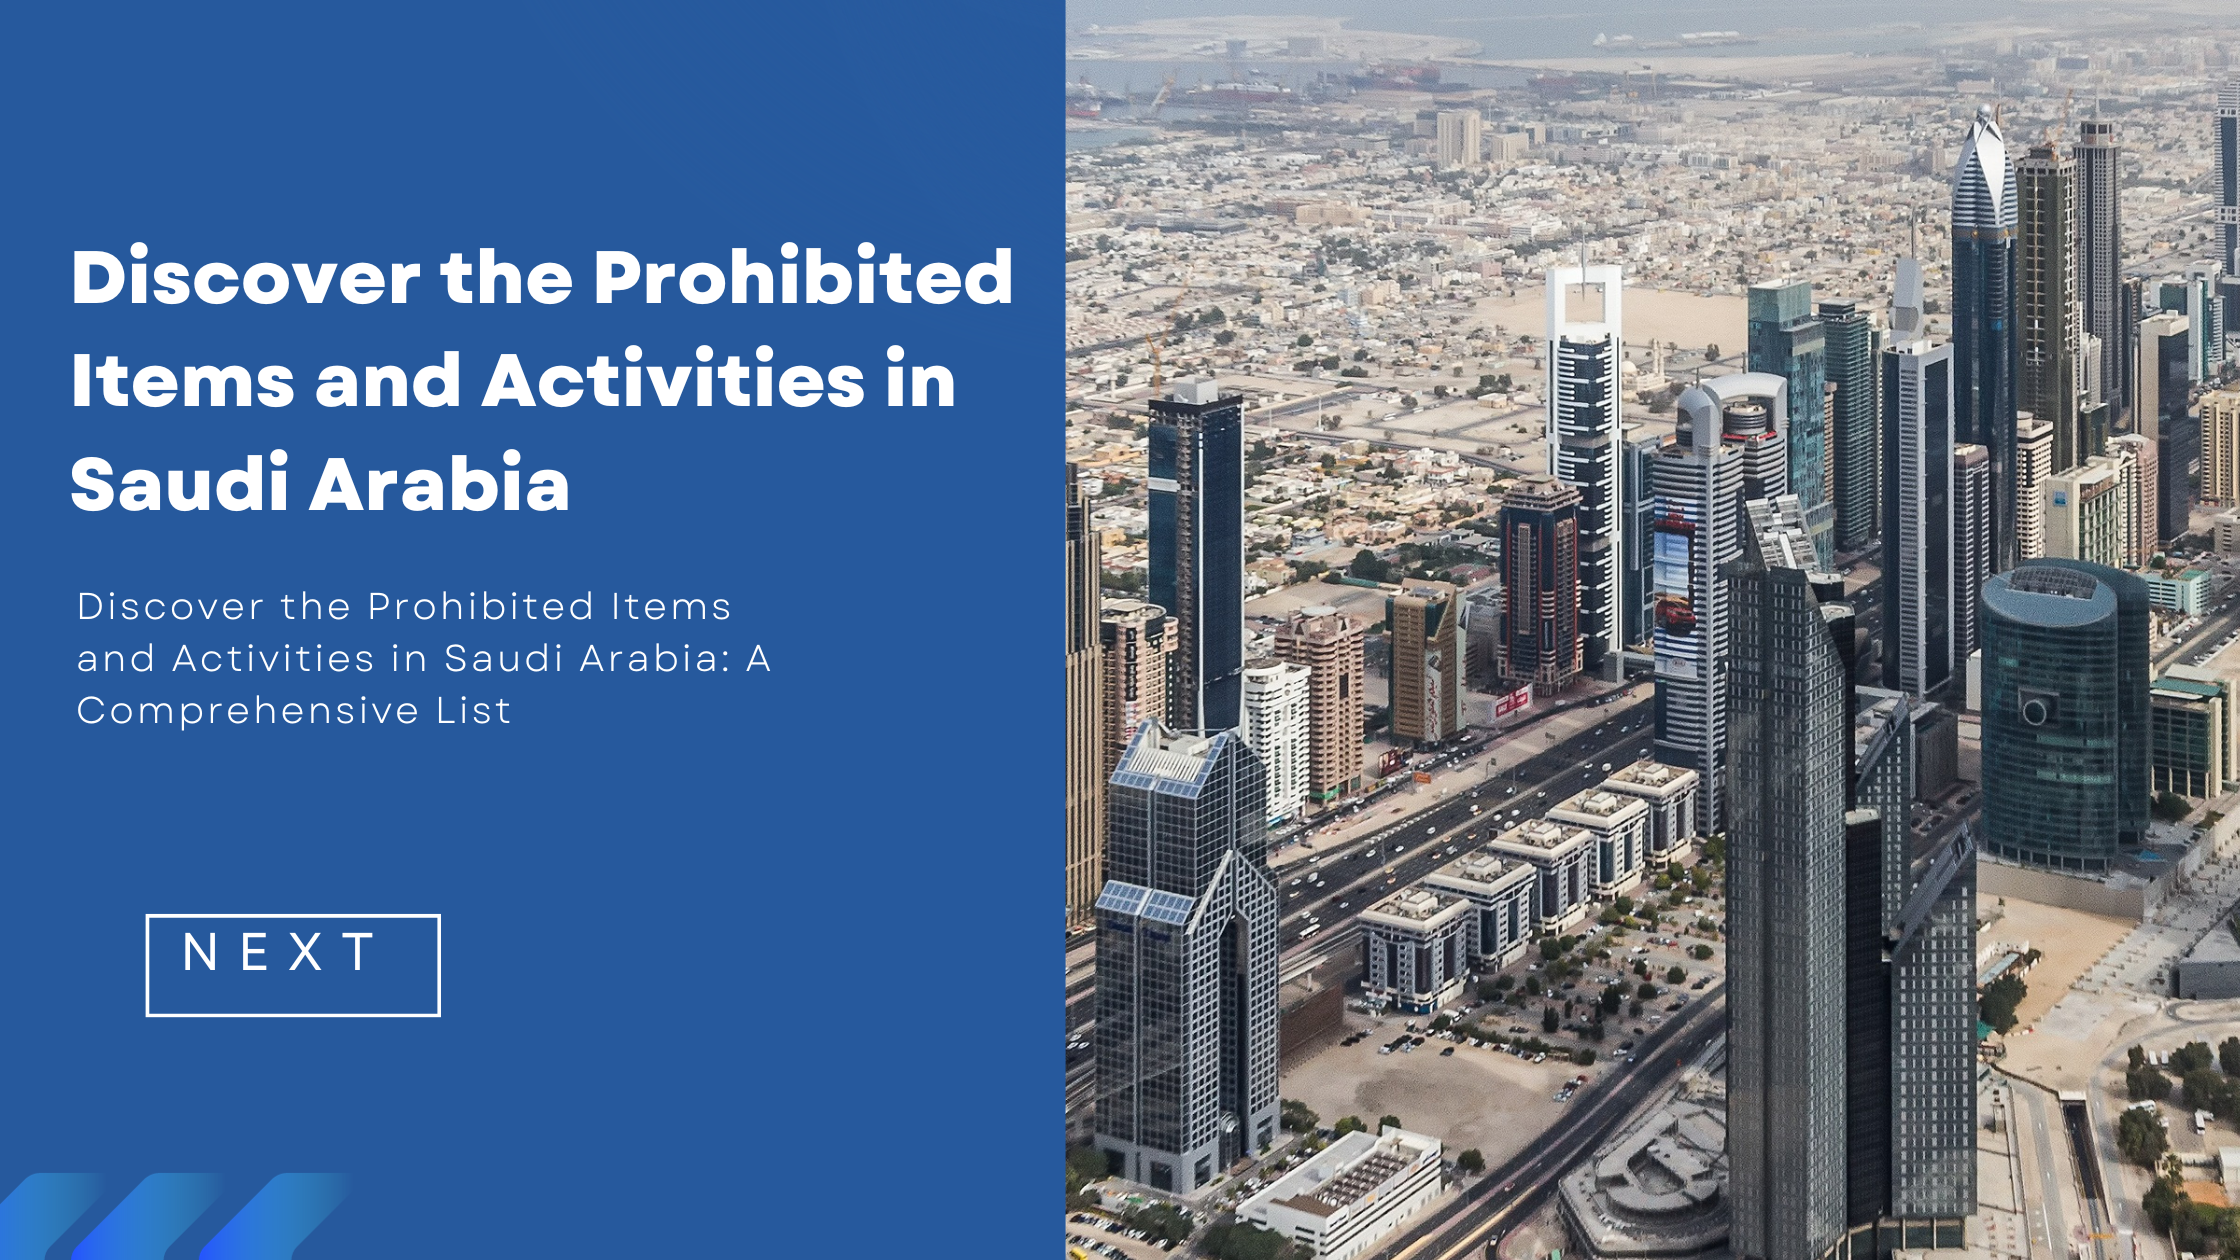 Understanding Saudi Arabia’s Strict Regulations A Comprehensive List of Banned Items and Activities